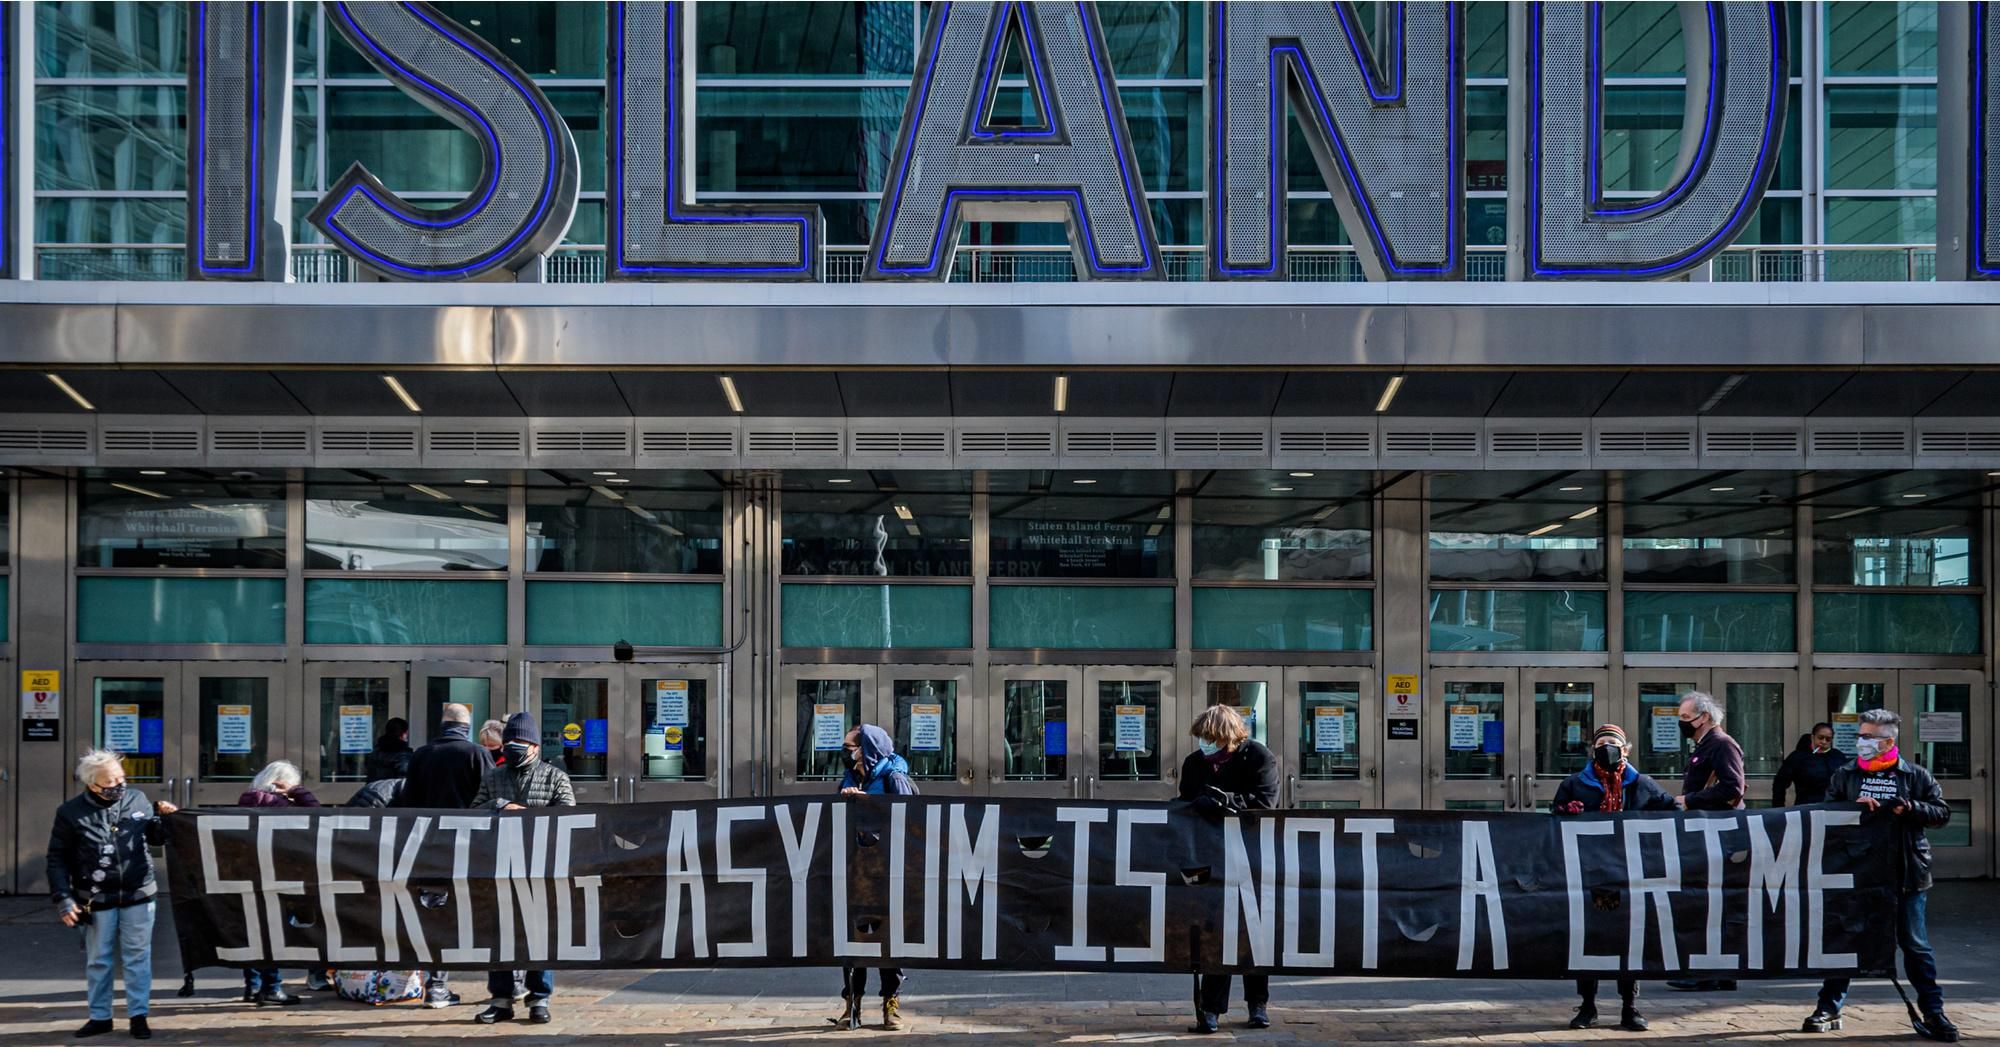 Protesters hold a banner reading "Seeking Asylum Is Not a Crime" at an April 22, 2021 demonstration at the Staten Island Ferry in New York City. (Photo: Erik McGregor/LightRocket via Getty Images)